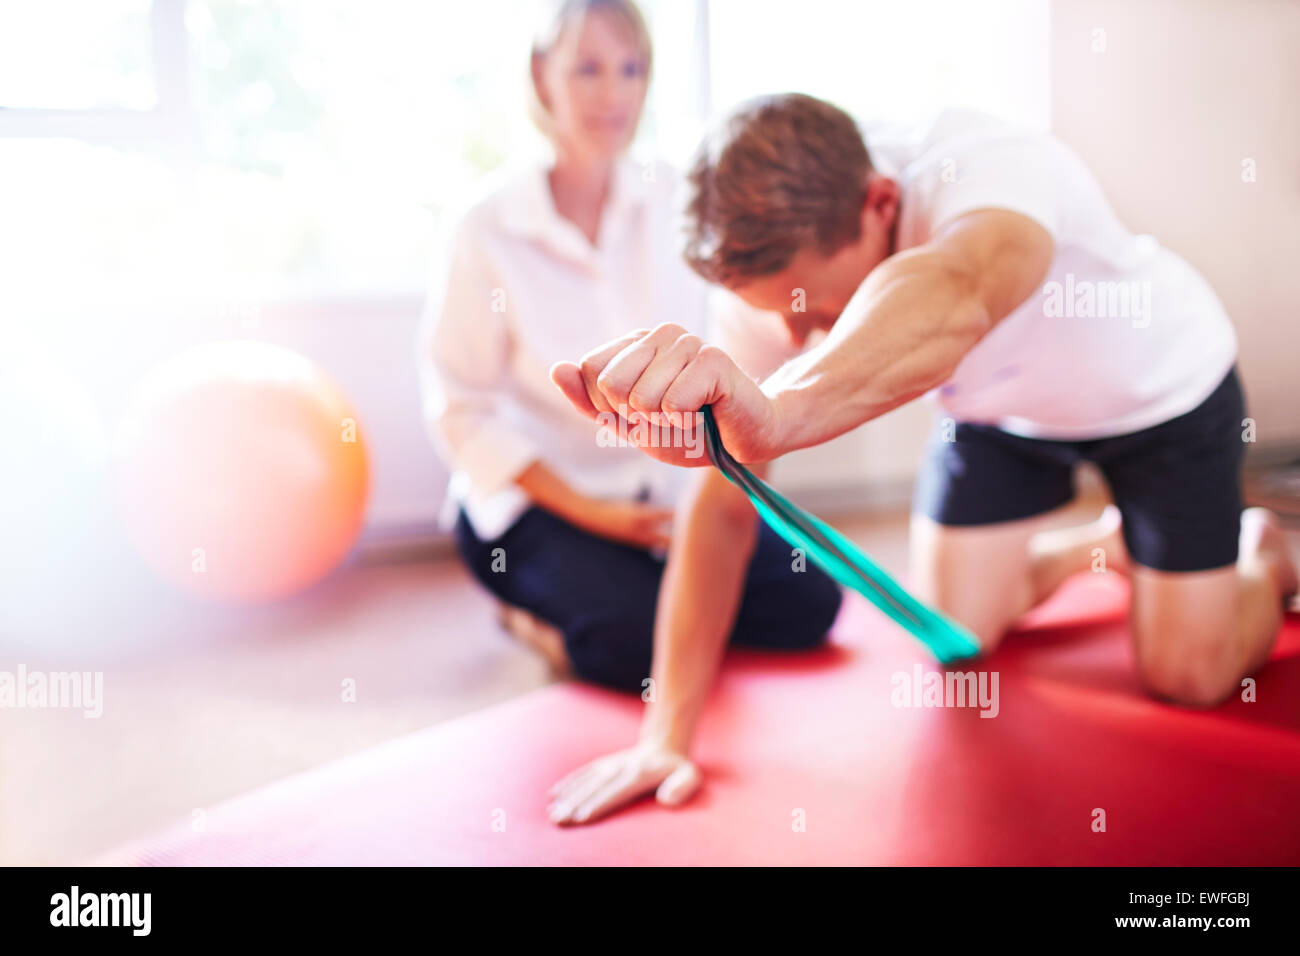 Physical therapist guiding man pulling resistance band Stock Photo